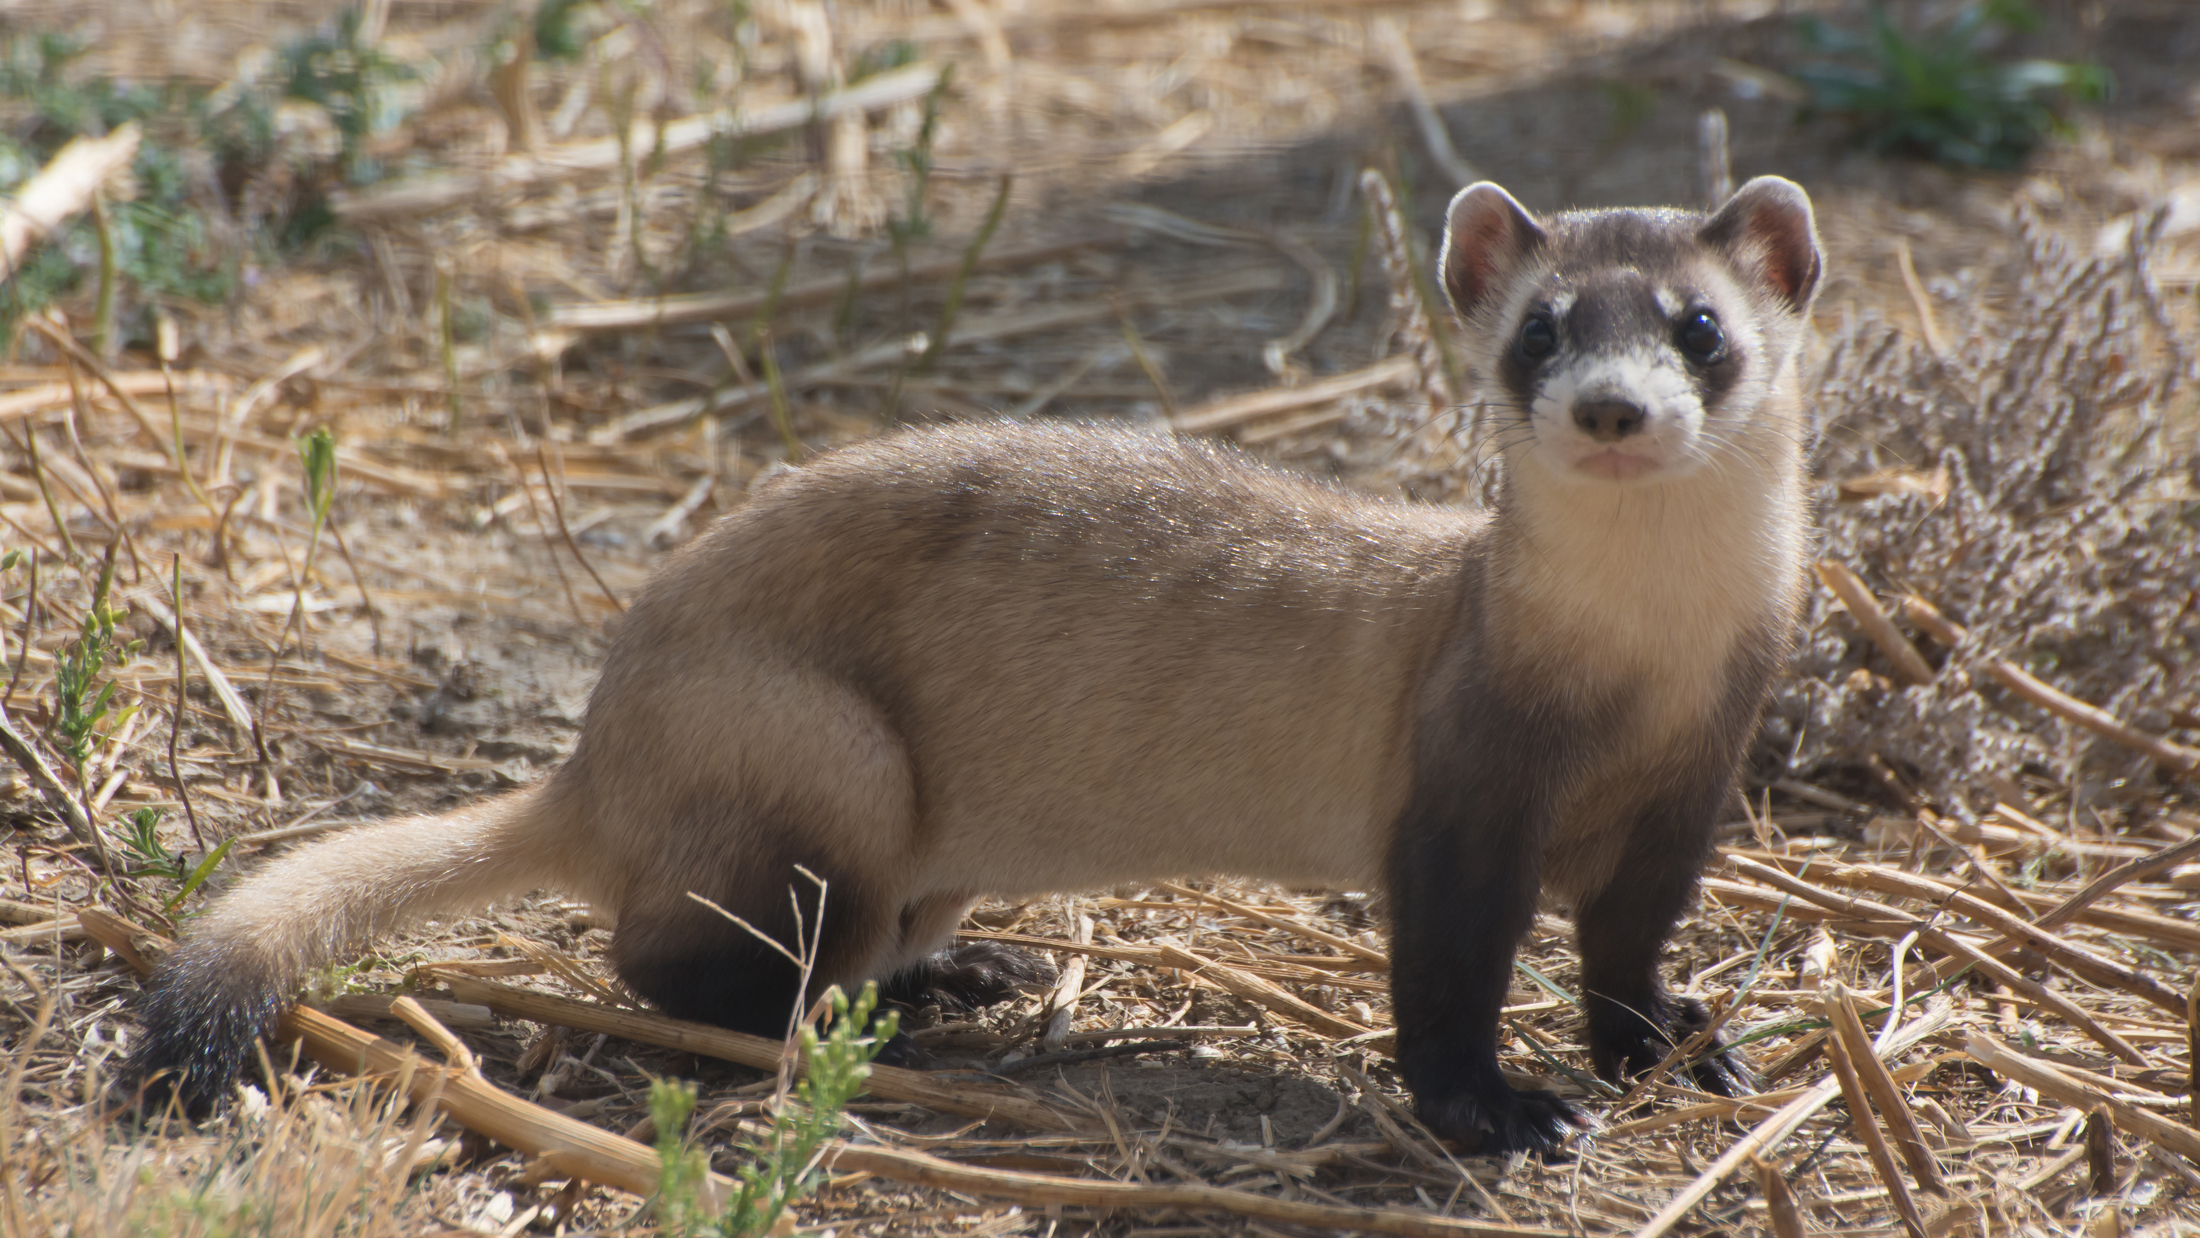 Recovery Hope for BlackFooted Ferrets, One of Our Most Endangered